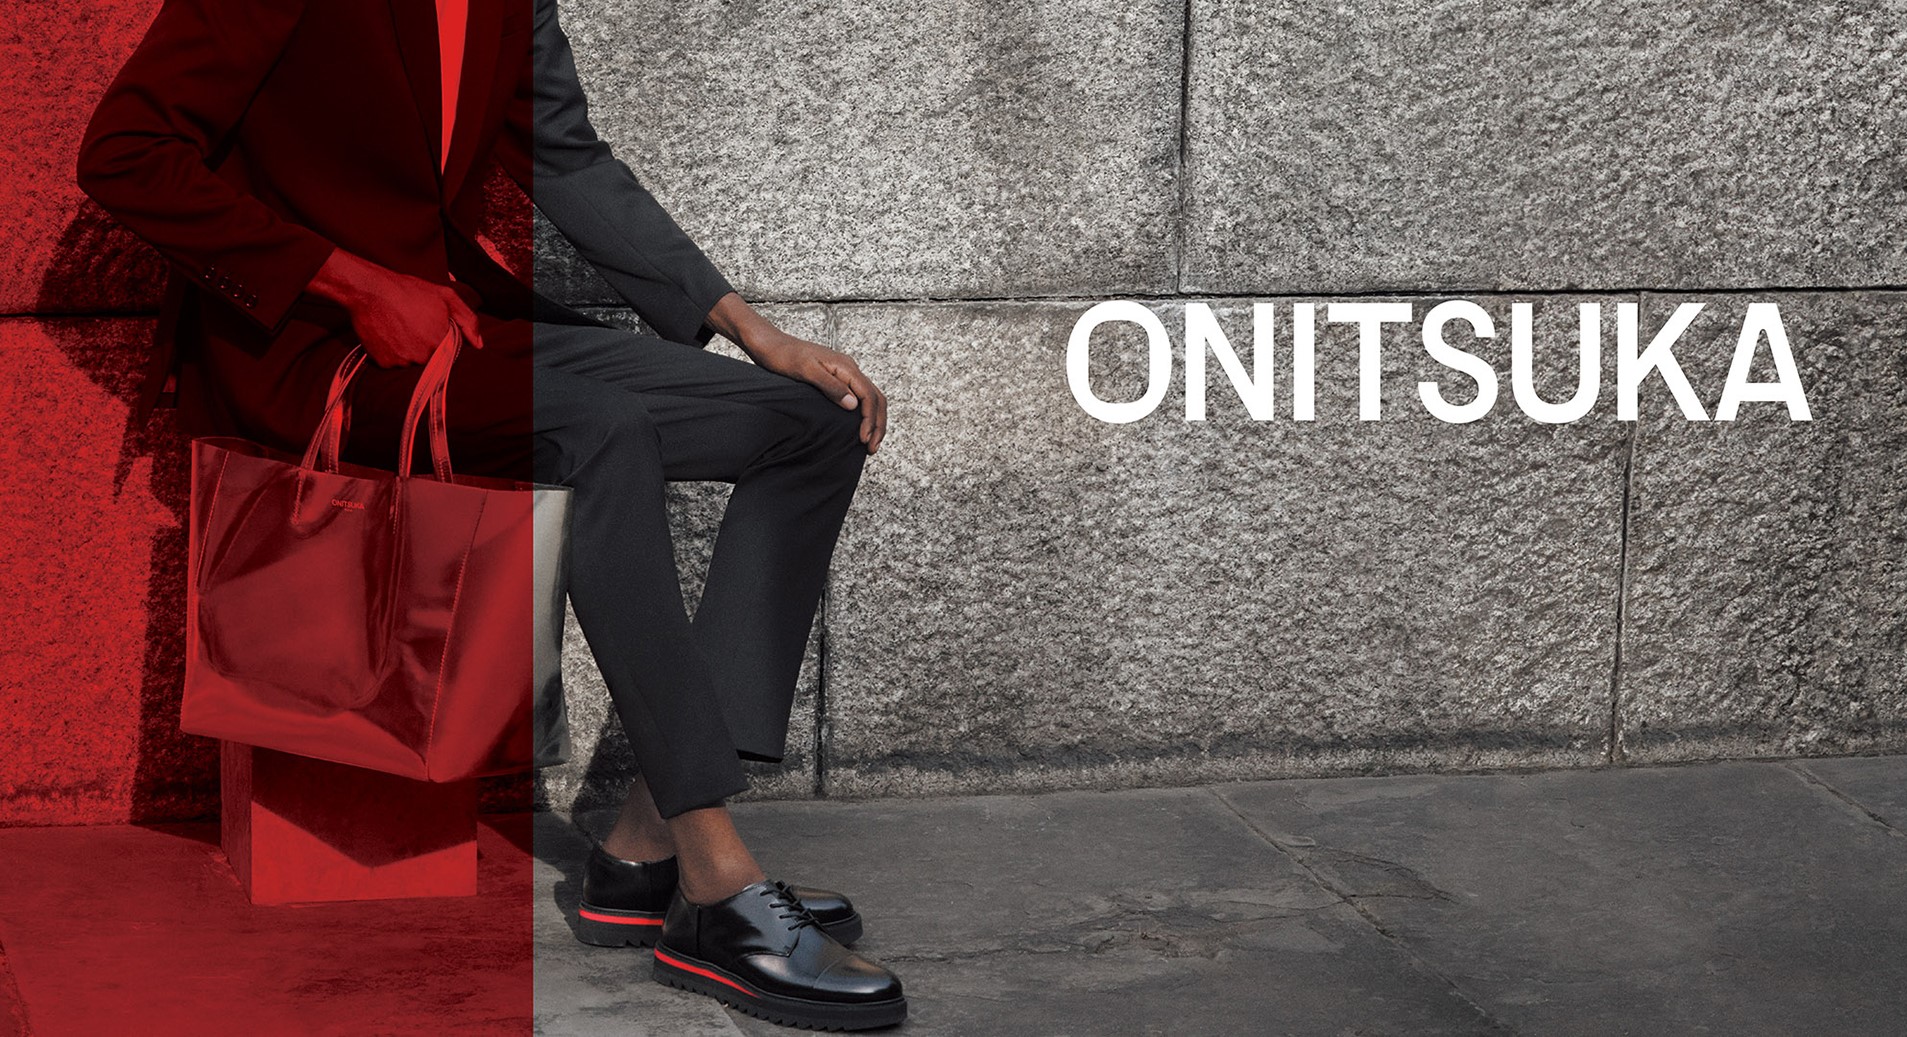 Onitsuka Tiger's new luxury line “THE ONITSUKA” | SHOES MASTER